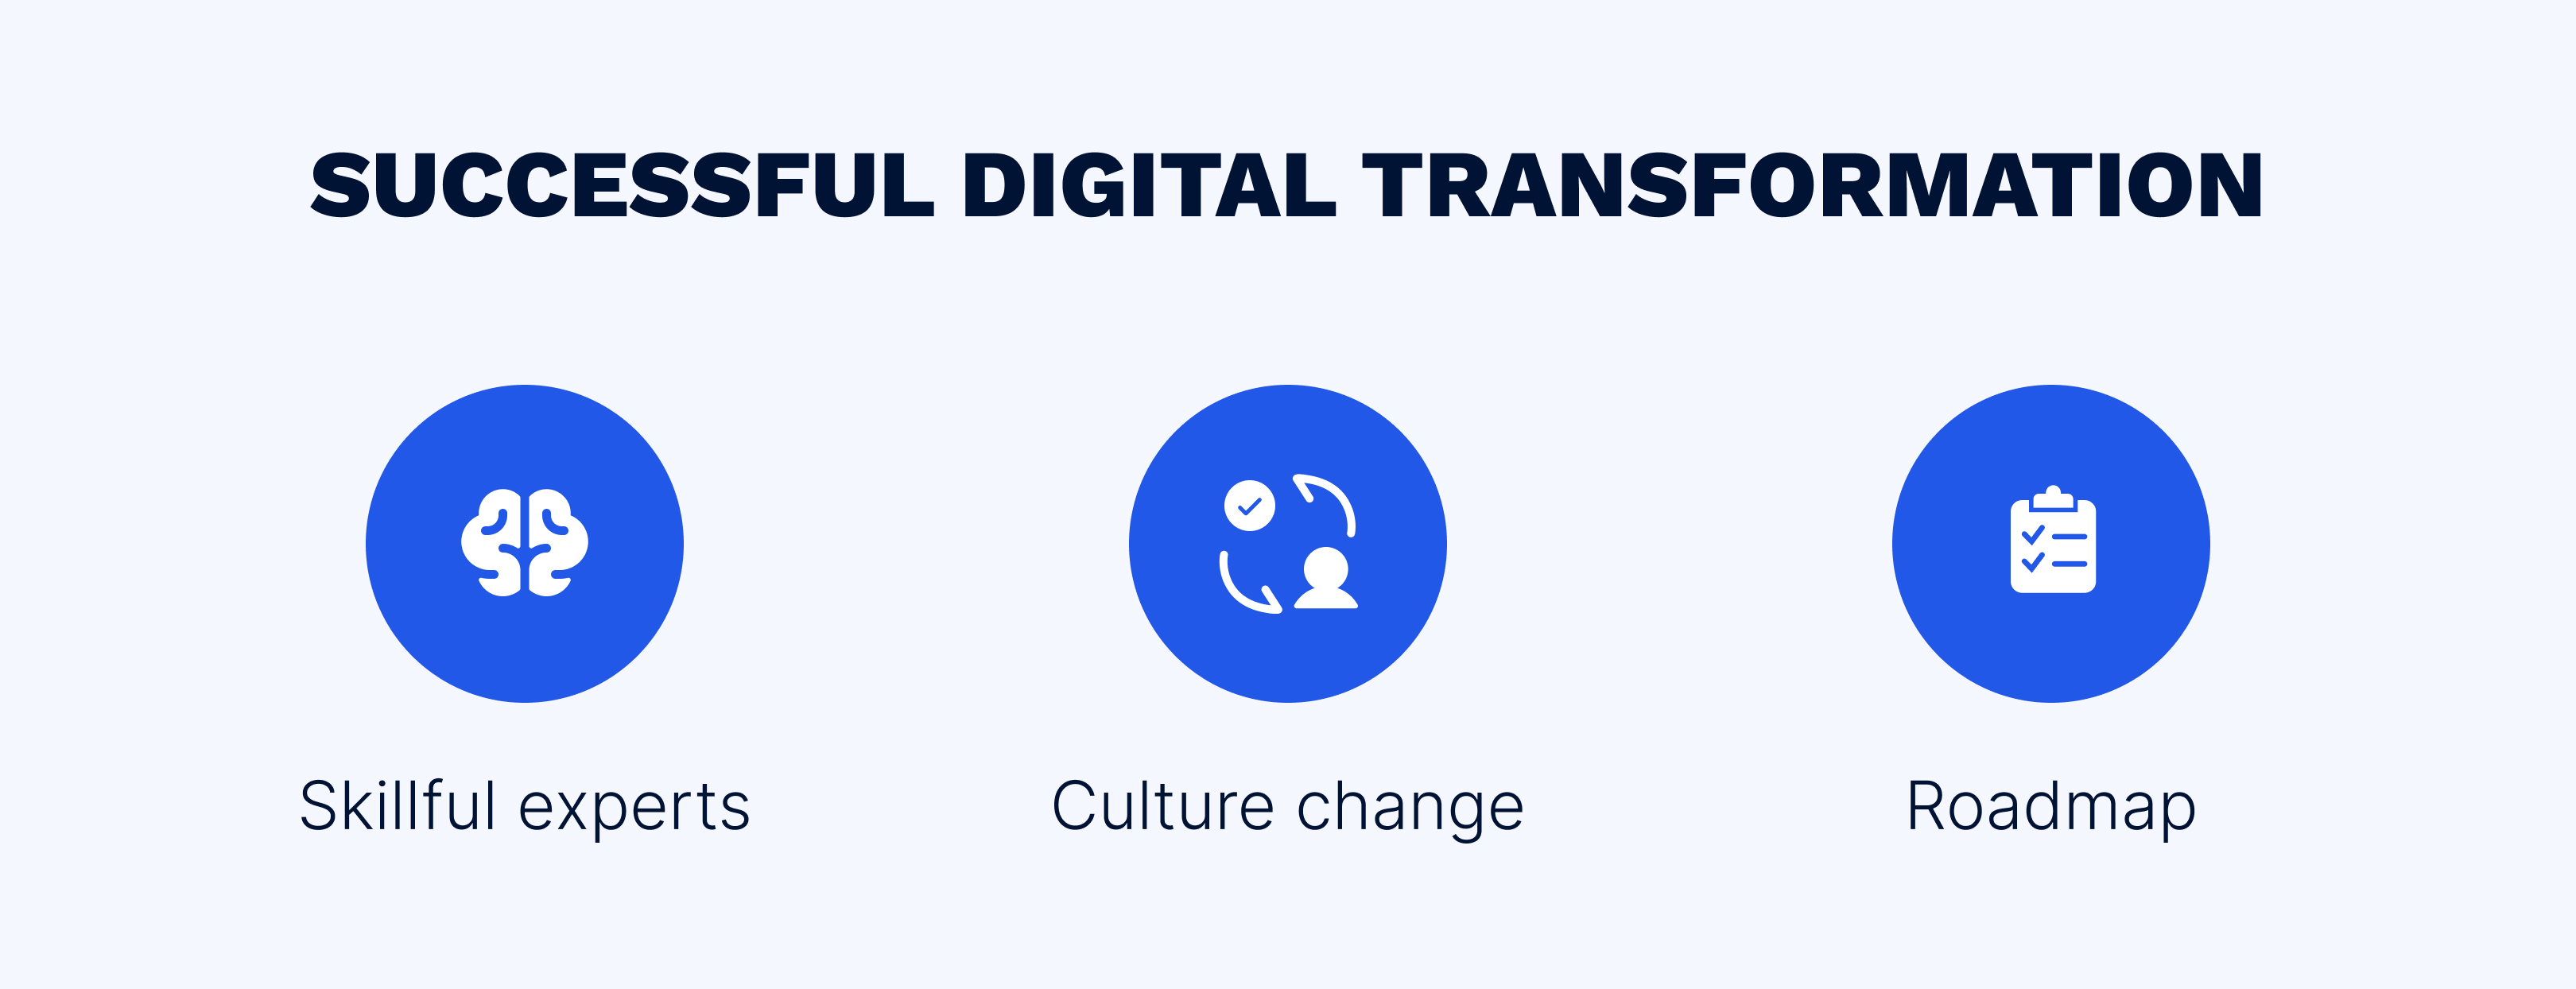 What are the 3 main components of digital transformation